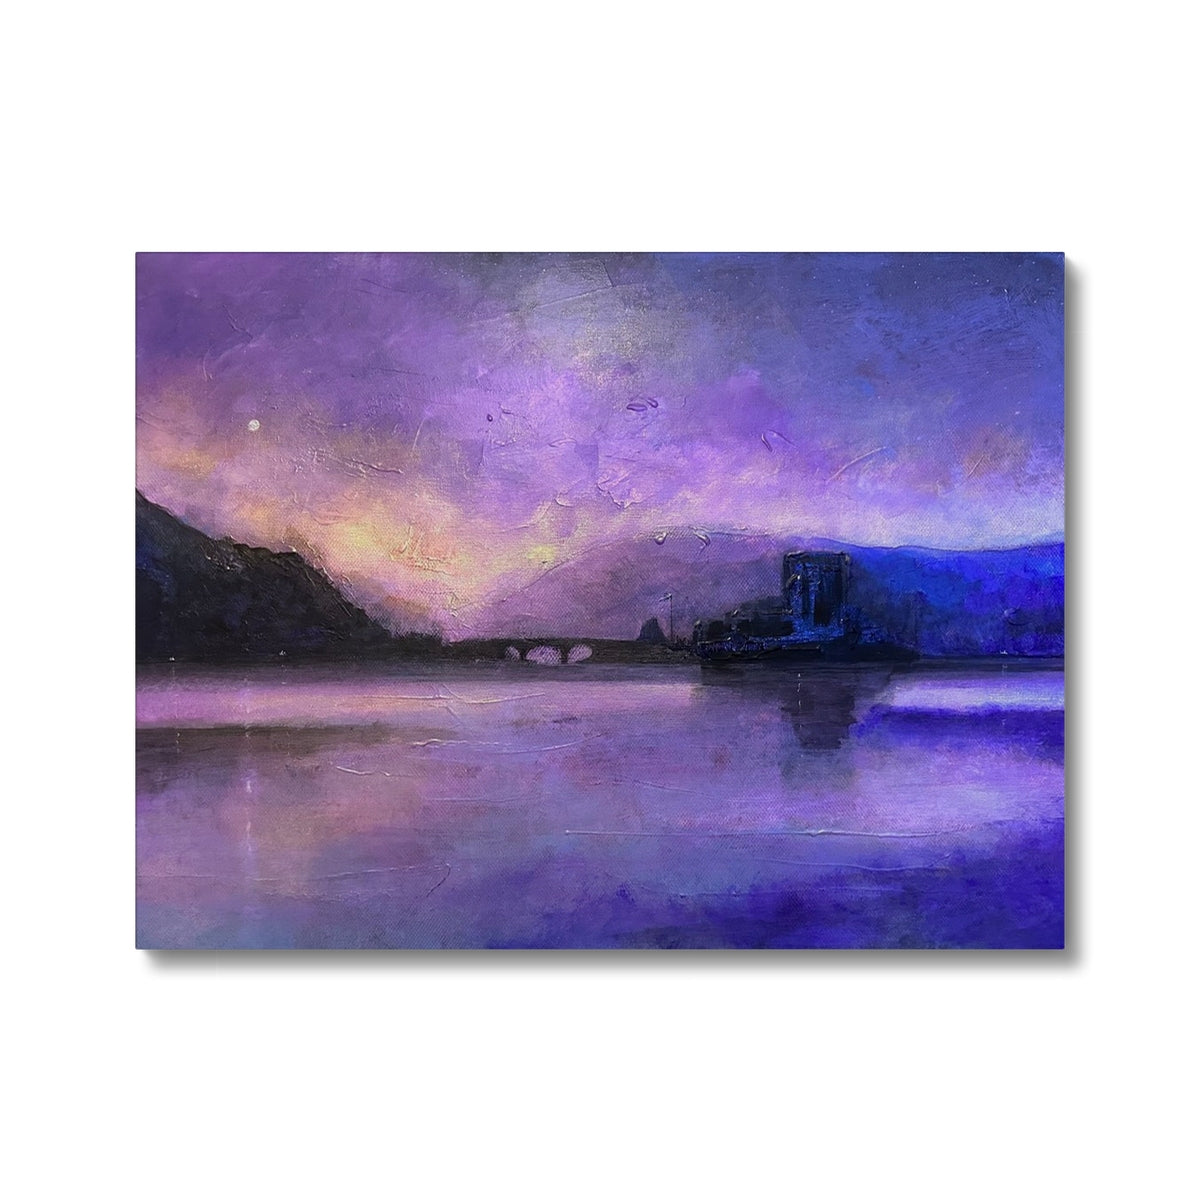 Eilean Donan Castle Moonset Painting | Canvas From Scotland-Contemporary Stretched Canvas Prints-Historic & Iconic Scotland Art Gallery-24"x18"-Paintings, Prints, Homeware, Art Gifts From Scotland By Scottish Artist Kevin Hunter